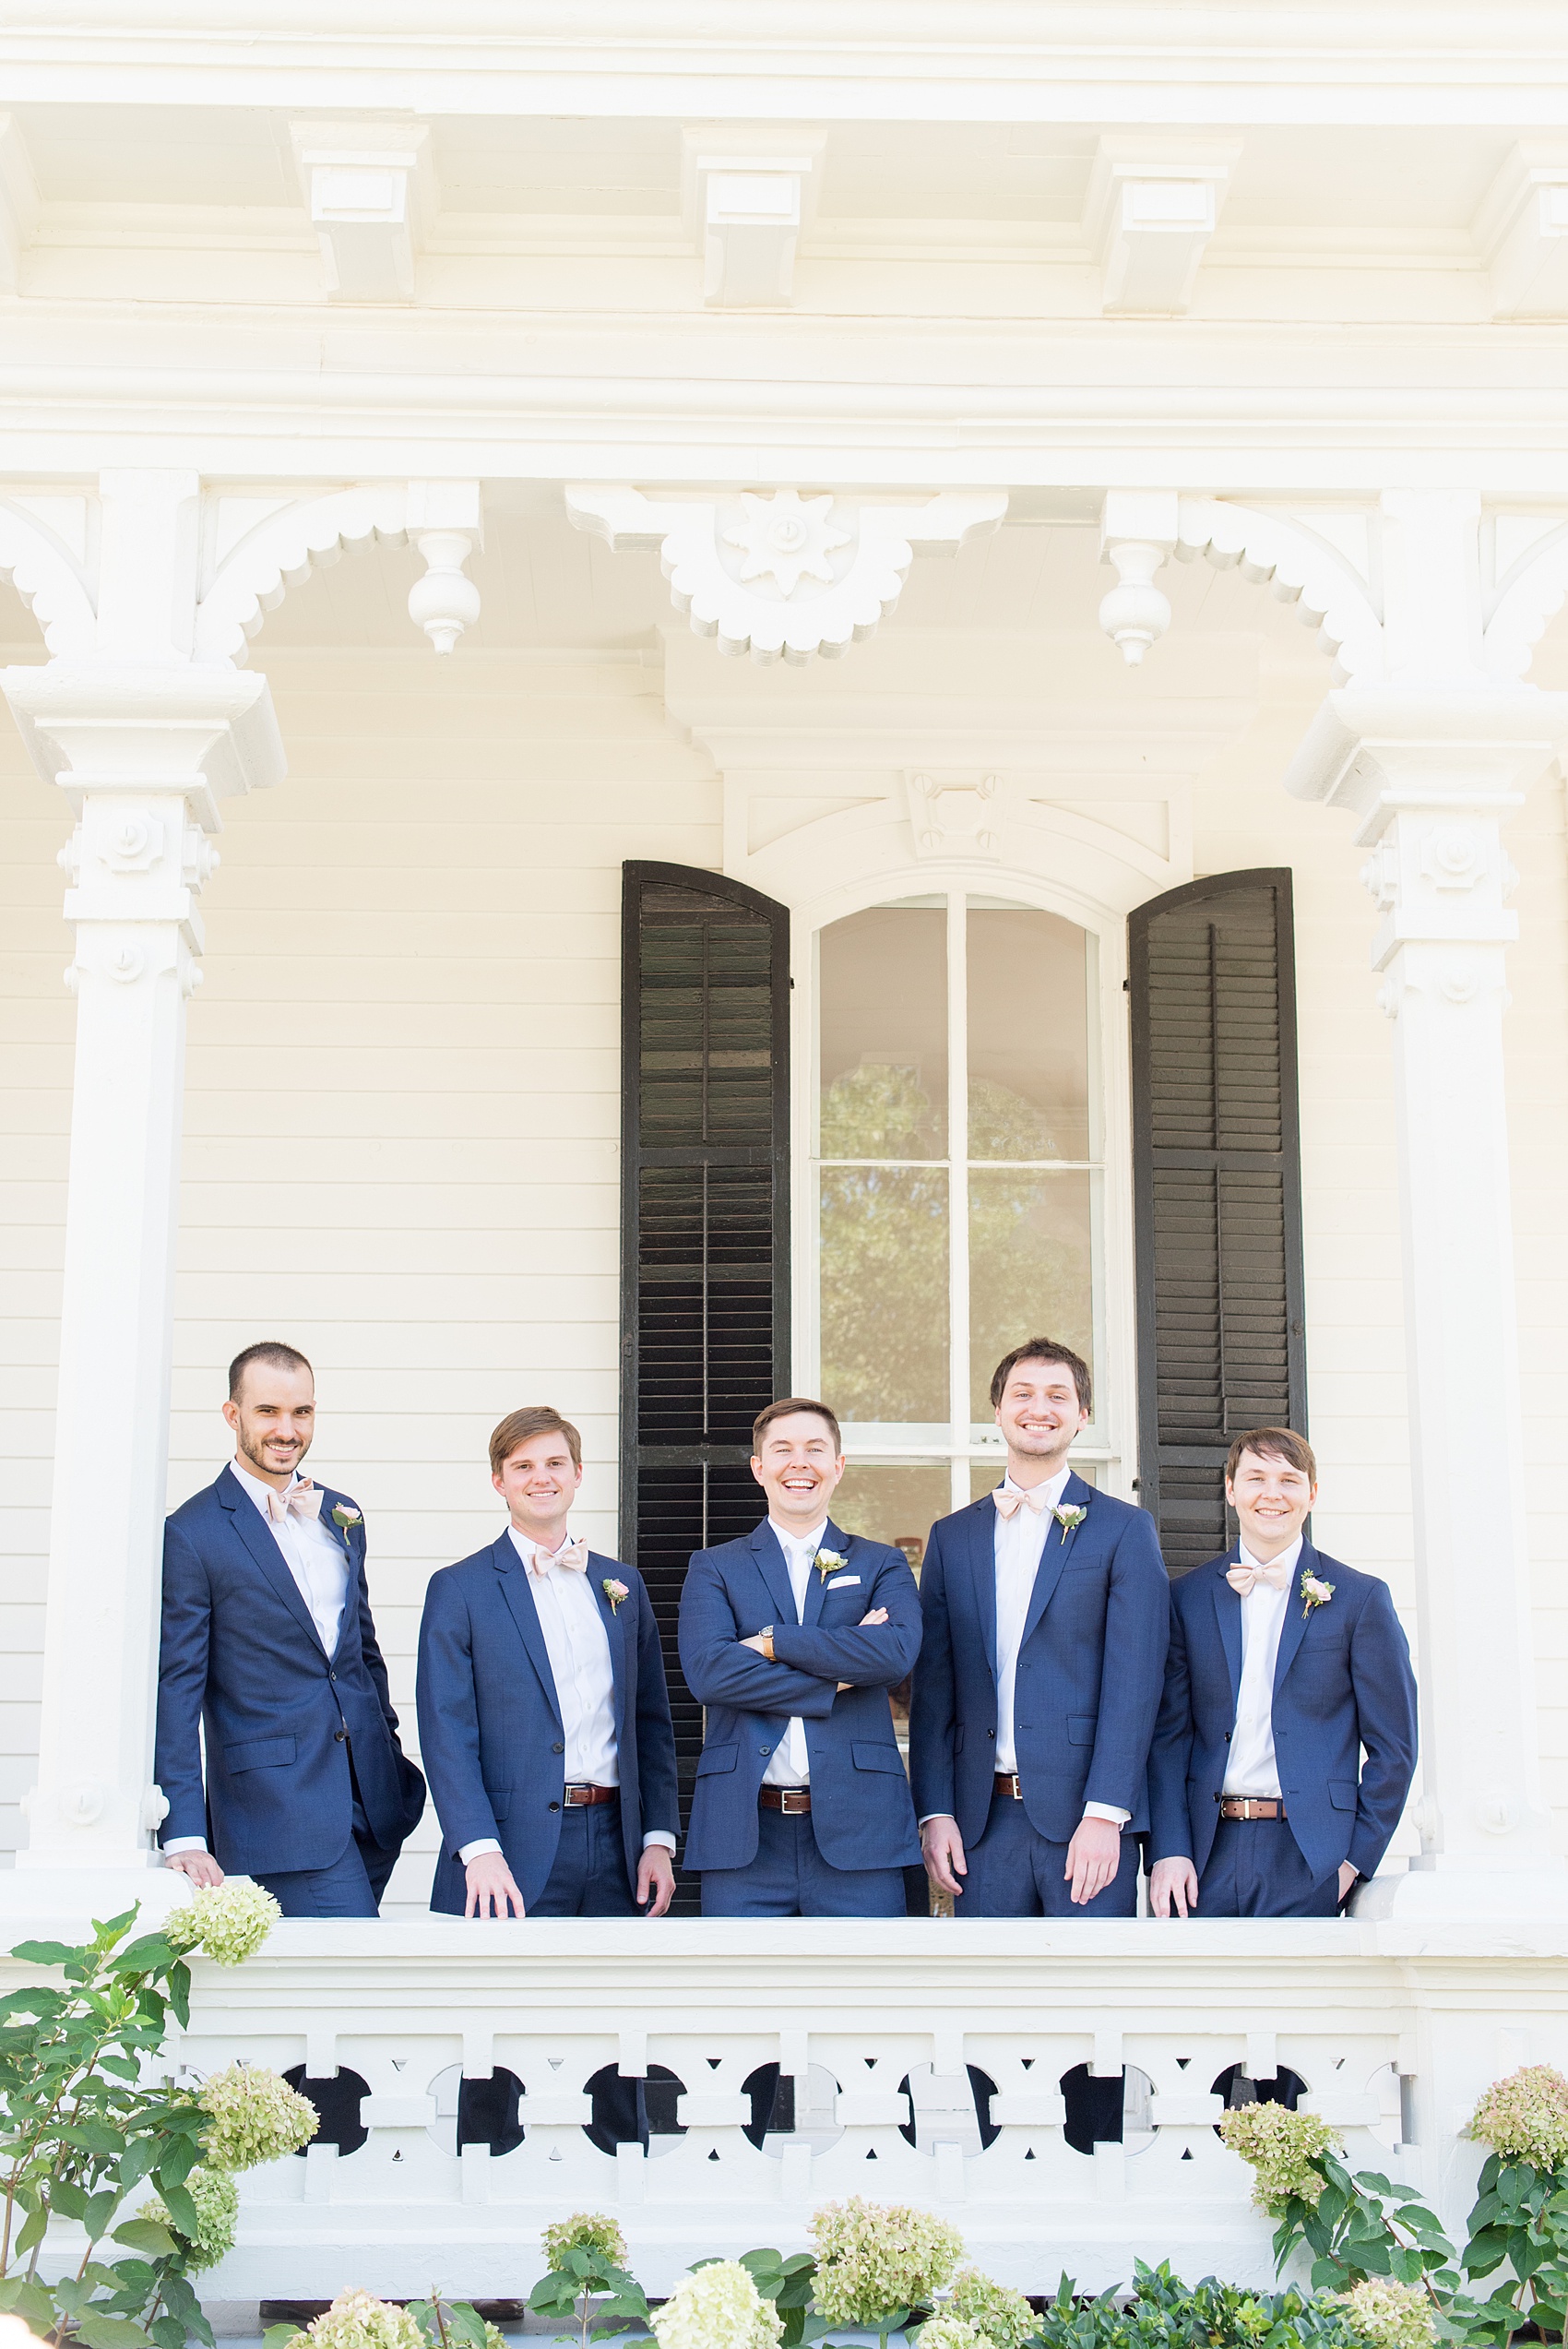 Mikkel Paige Photography pictures from a wedding at Merrimon-Wynne House in Raleigh, NC. Photo of the groomsmen in blue linen suits, pink boutonnieres tied with copper wire and pink bow ties.